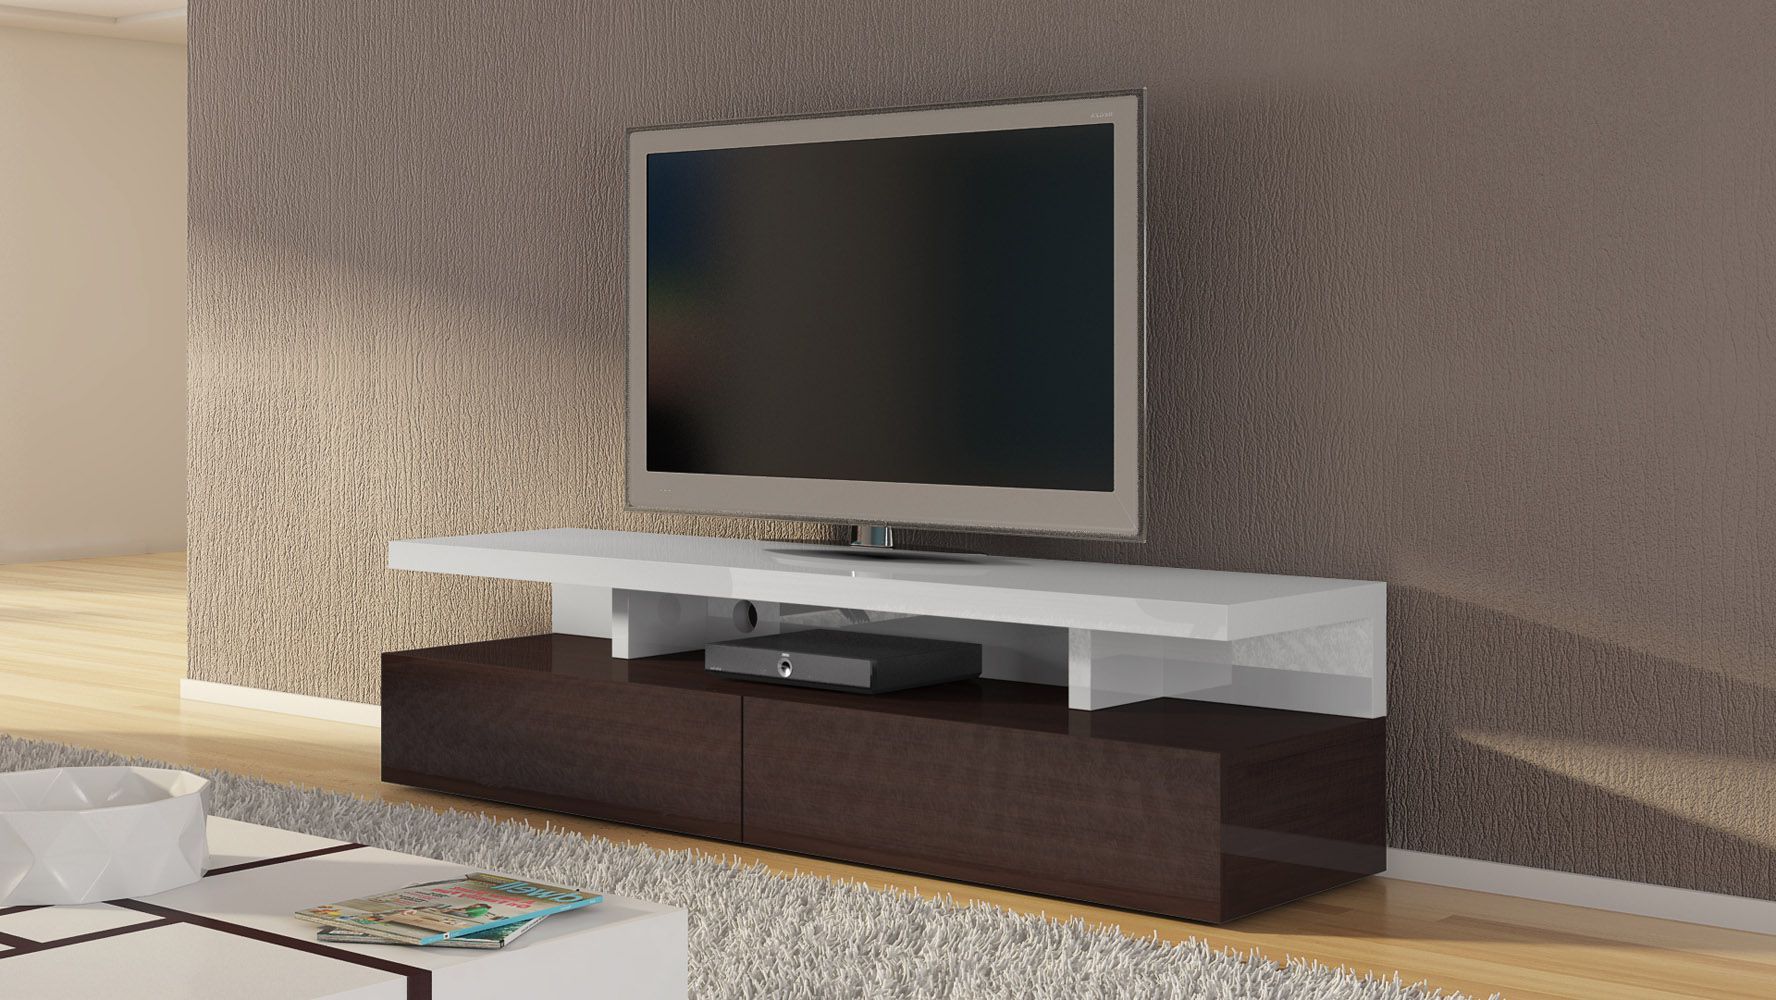 Mcintosh Tv Stand – White And Ebony | White Tv Stands, Tv With Regard To Bromley White Wide Tv Stands (Gallery 15 of 20)